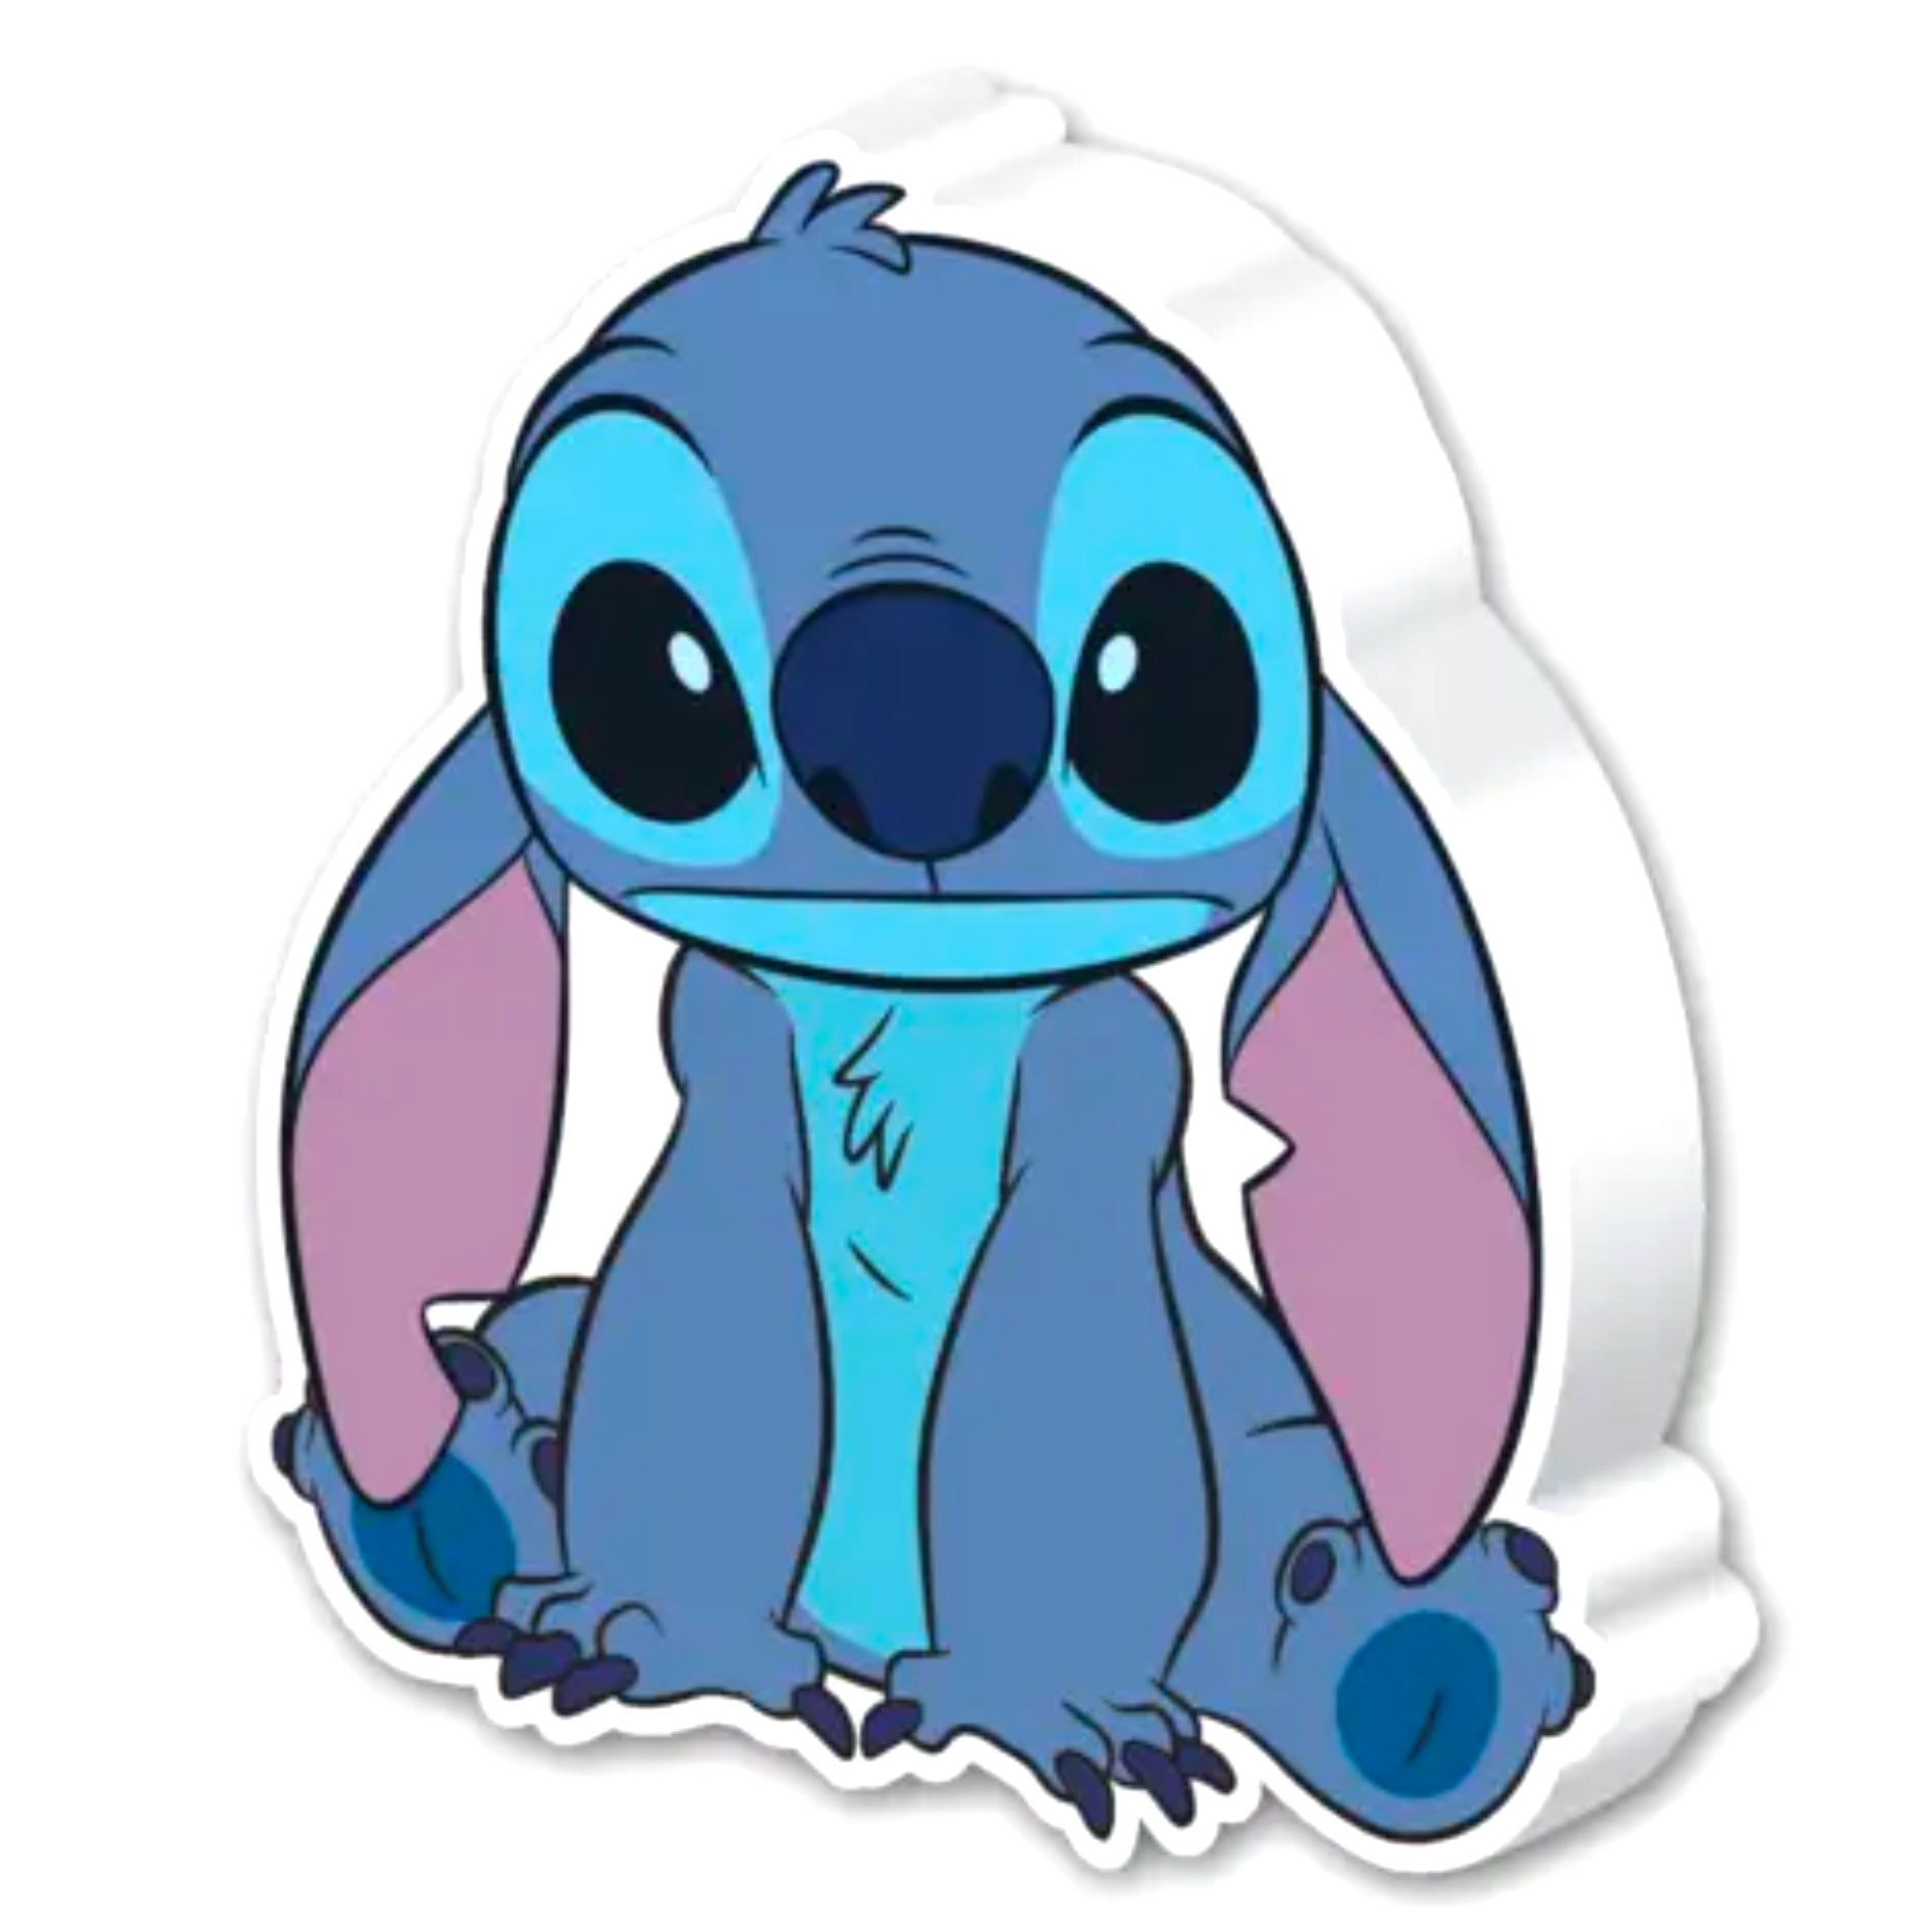 Stitch Get In Sit Down Shut Up Car Seat Covers, Stitch Car Seat Covers,  Funny Stitch Car Accessory sold by Receptive Racehorse, SKU 39686483